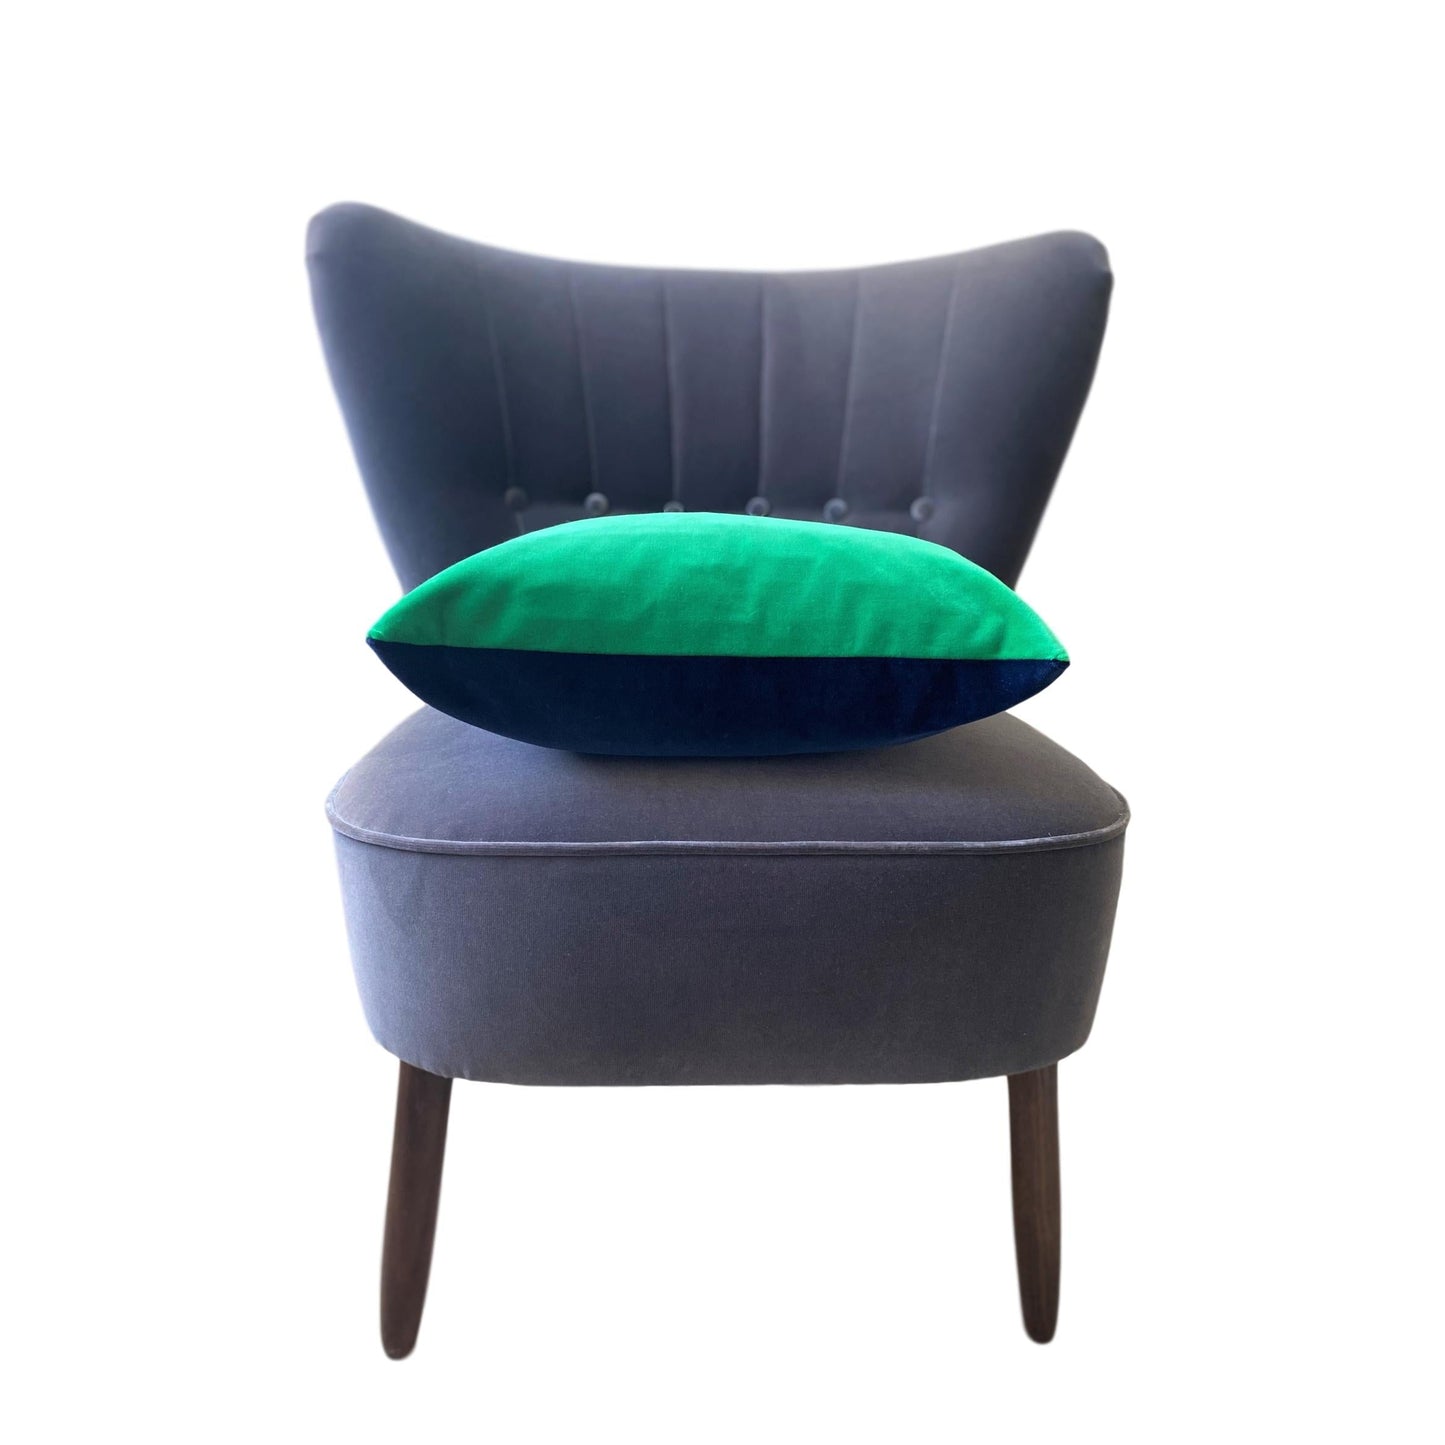 Navy Velvet Cushion Cover with Emerald Green